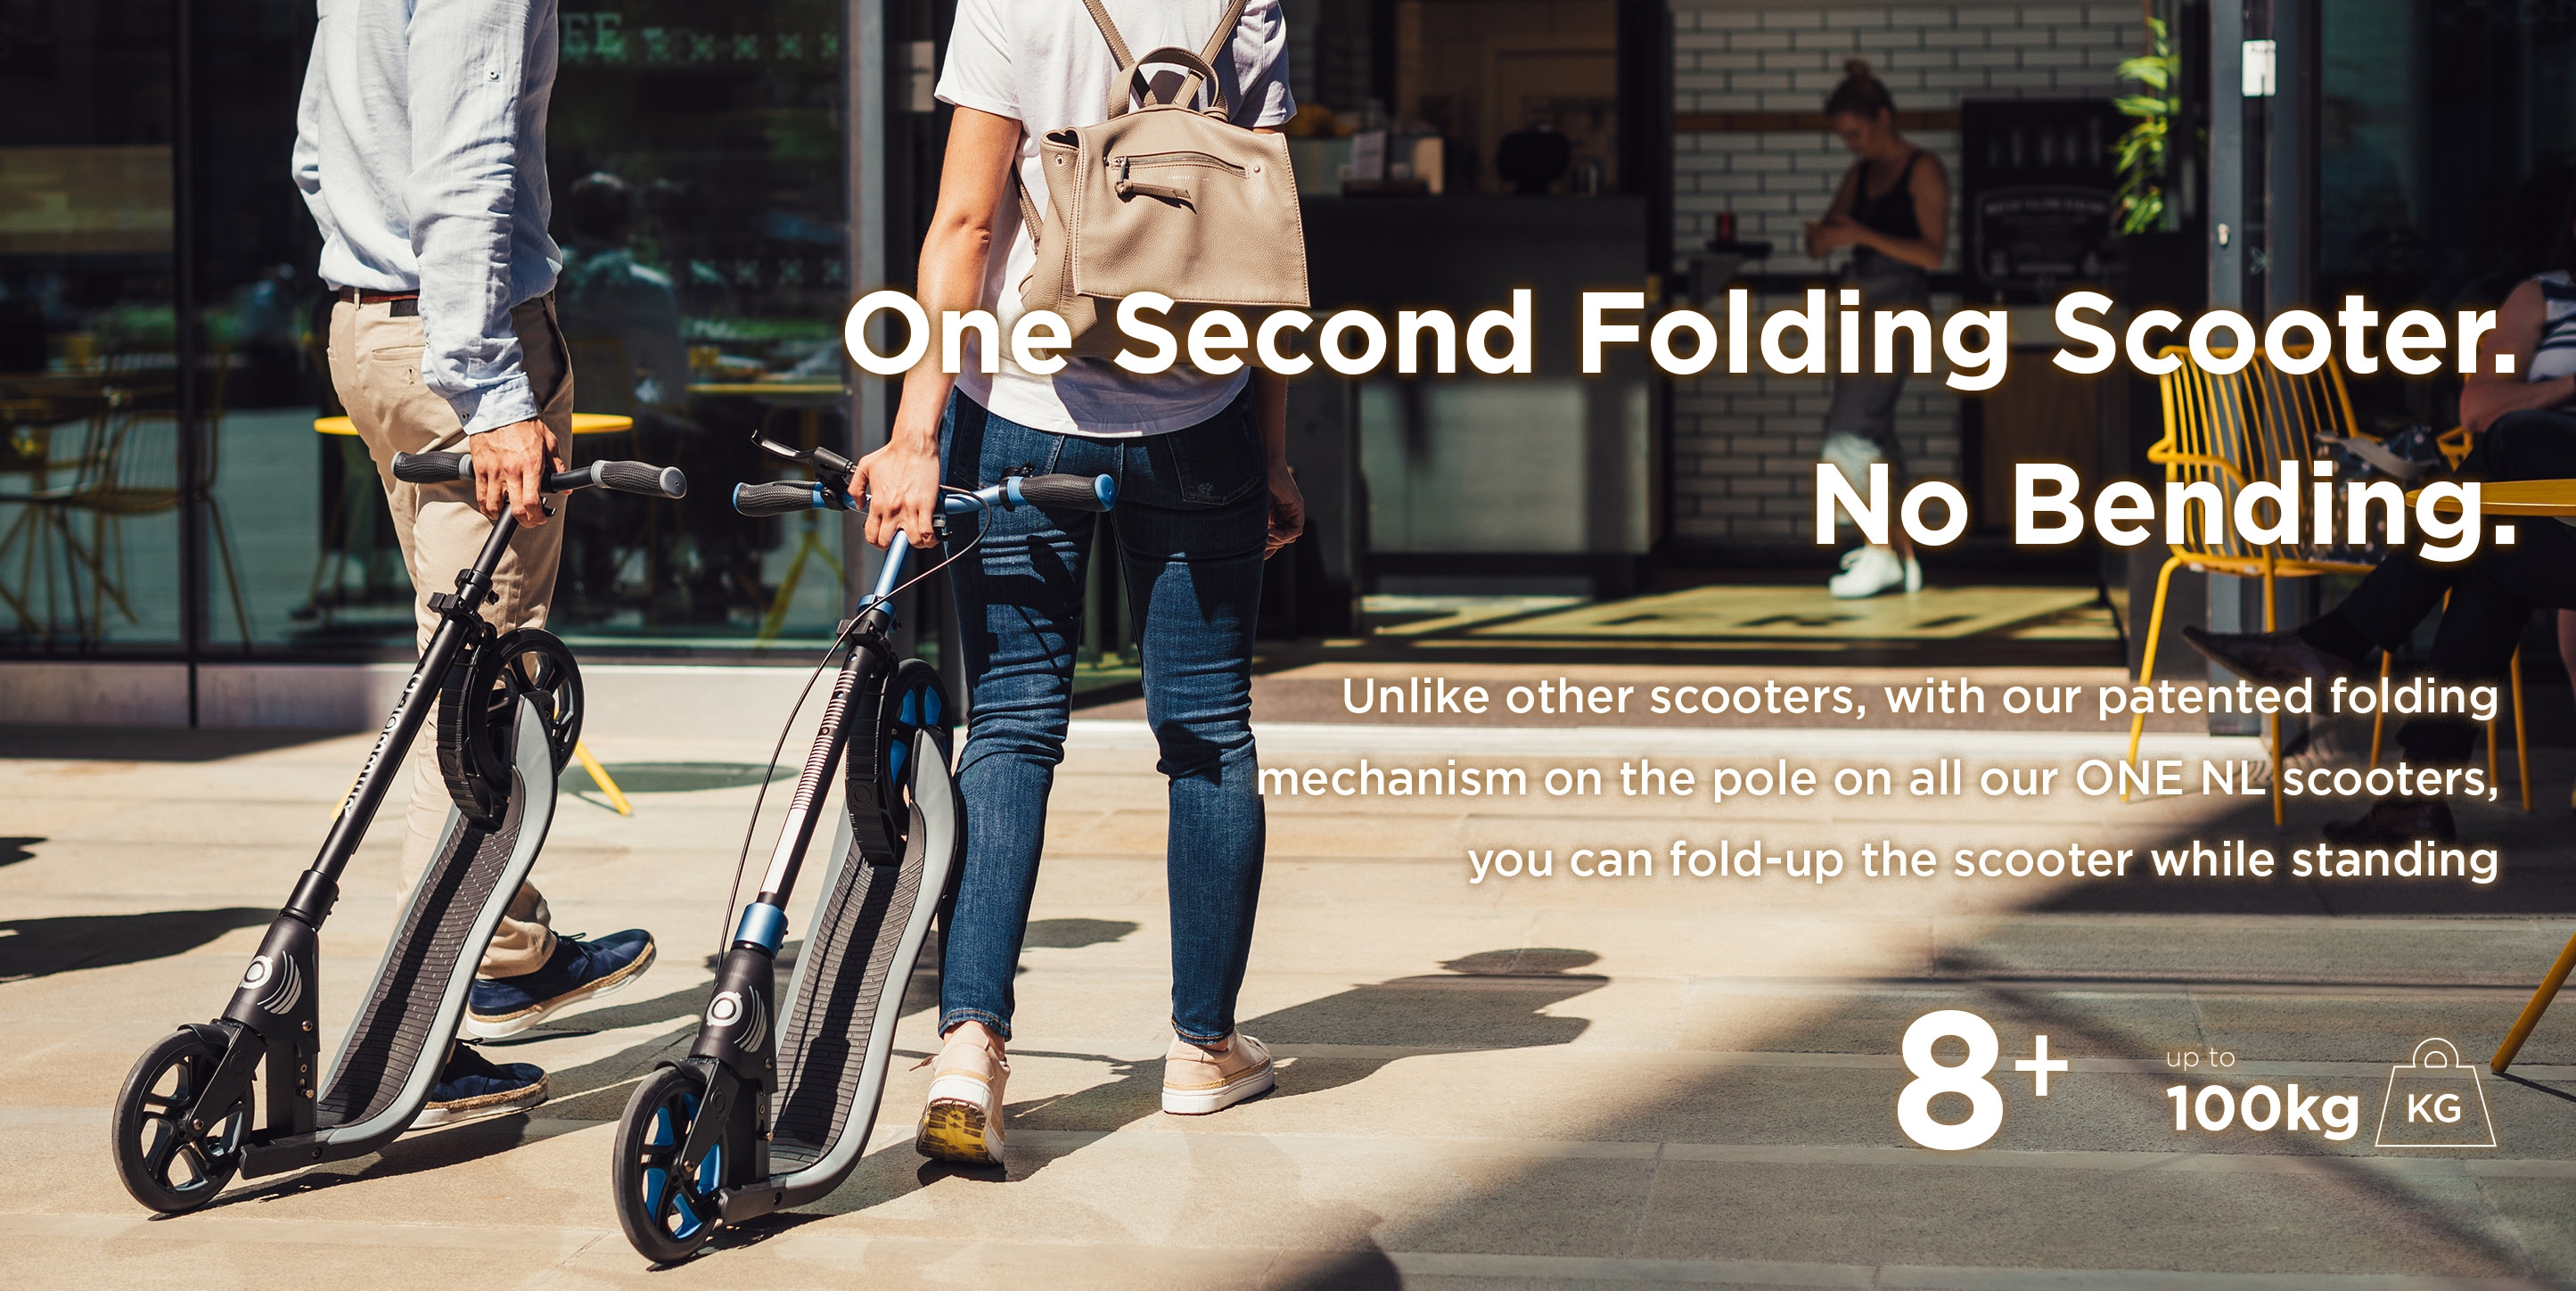 One second folding scooter. No bending required.